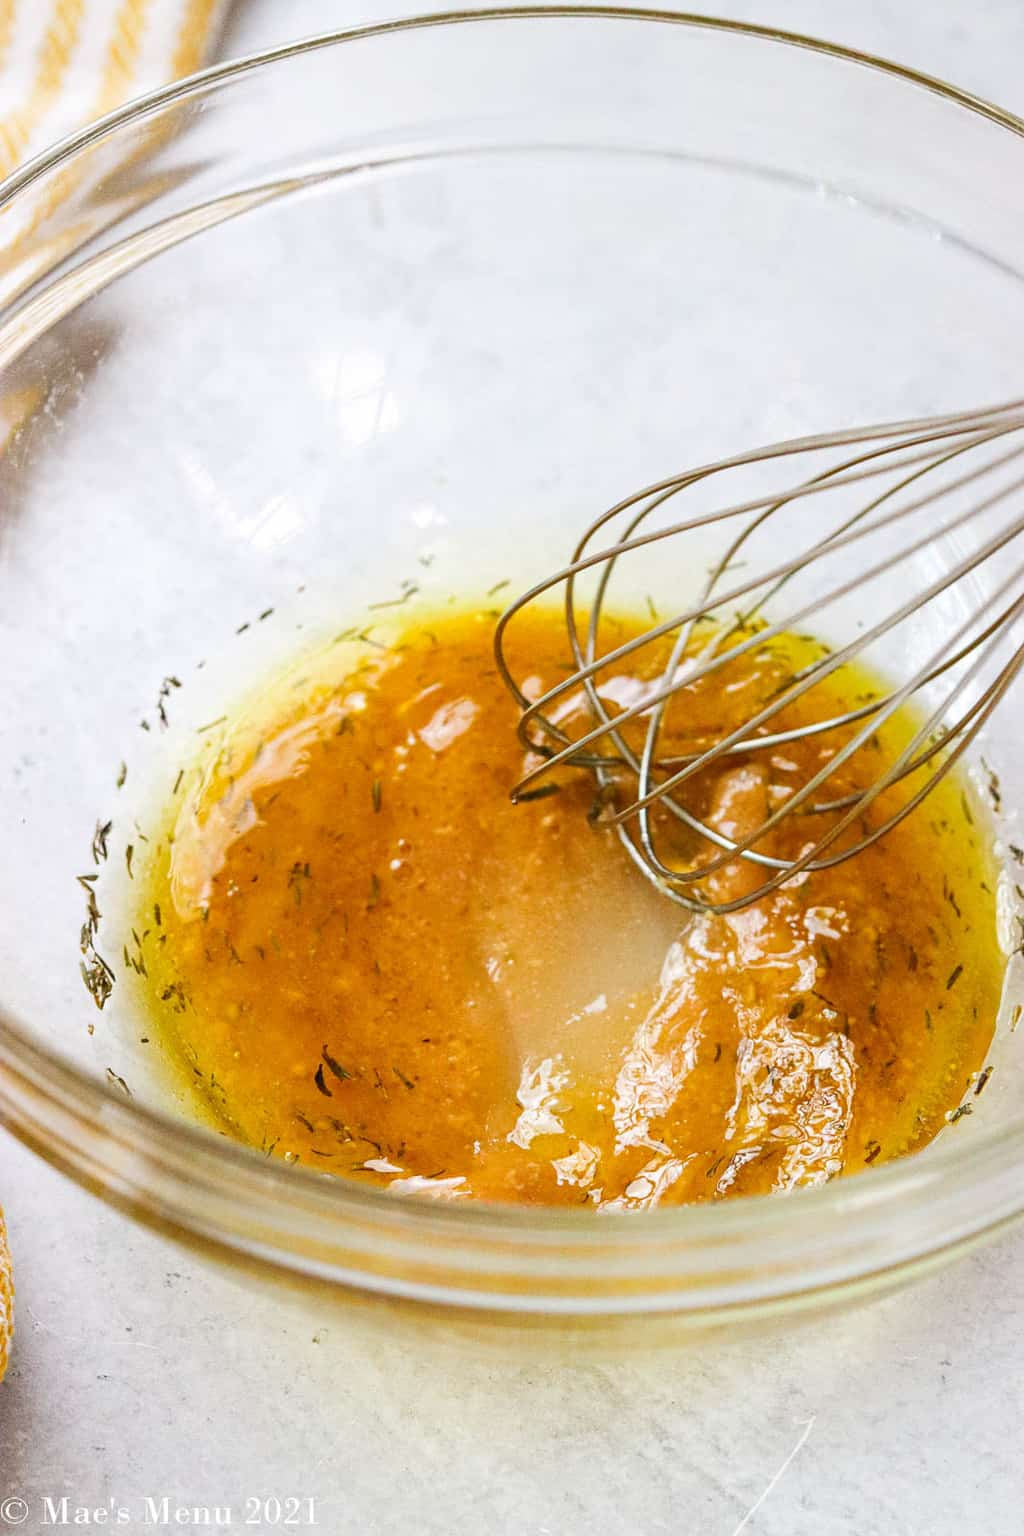 Whisking the salad dressing together in a large glass bowl